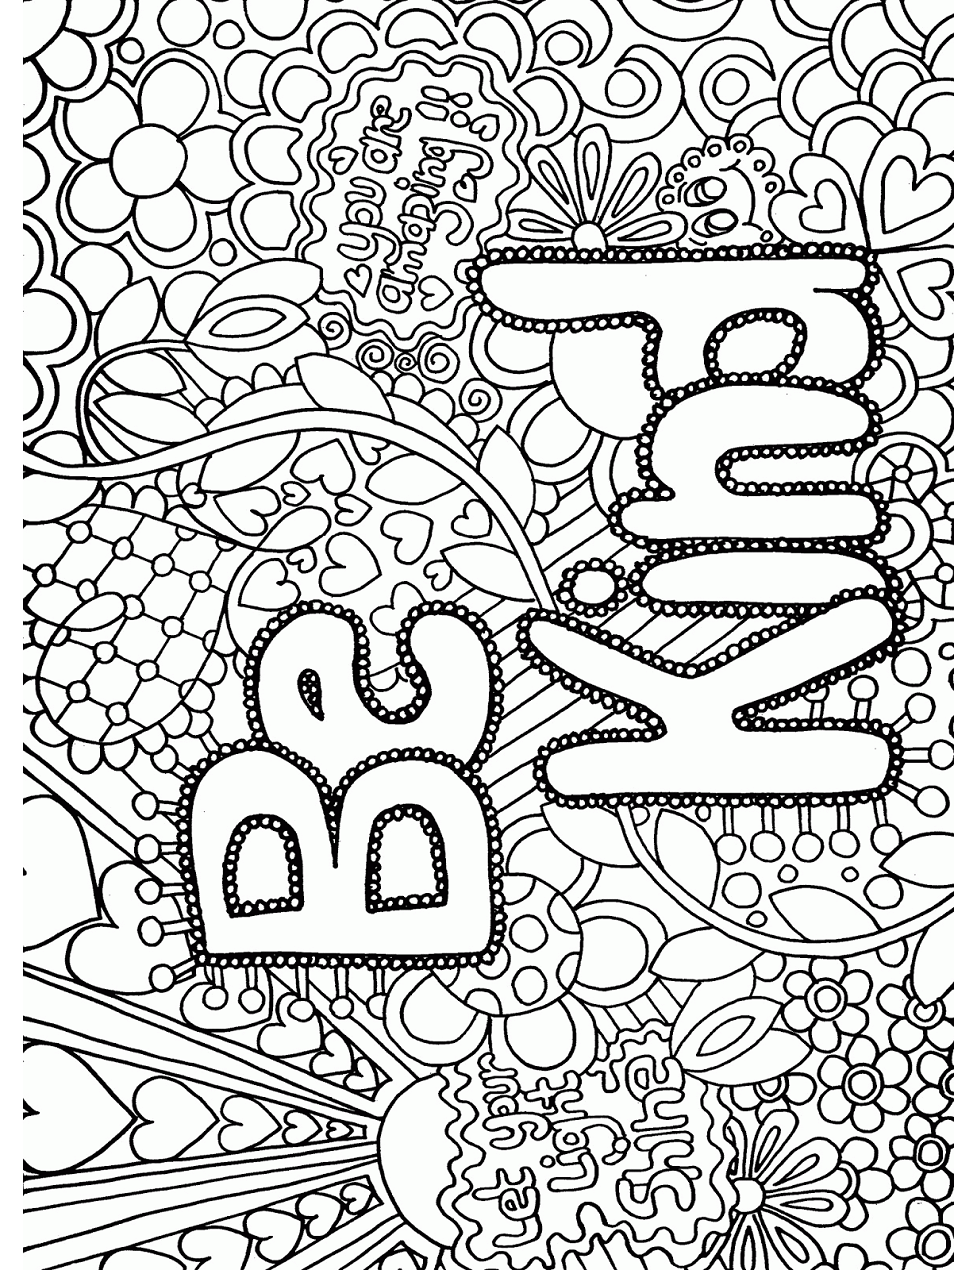 be-kind-coloring-page-free-printable-coloring-pages-for-kids